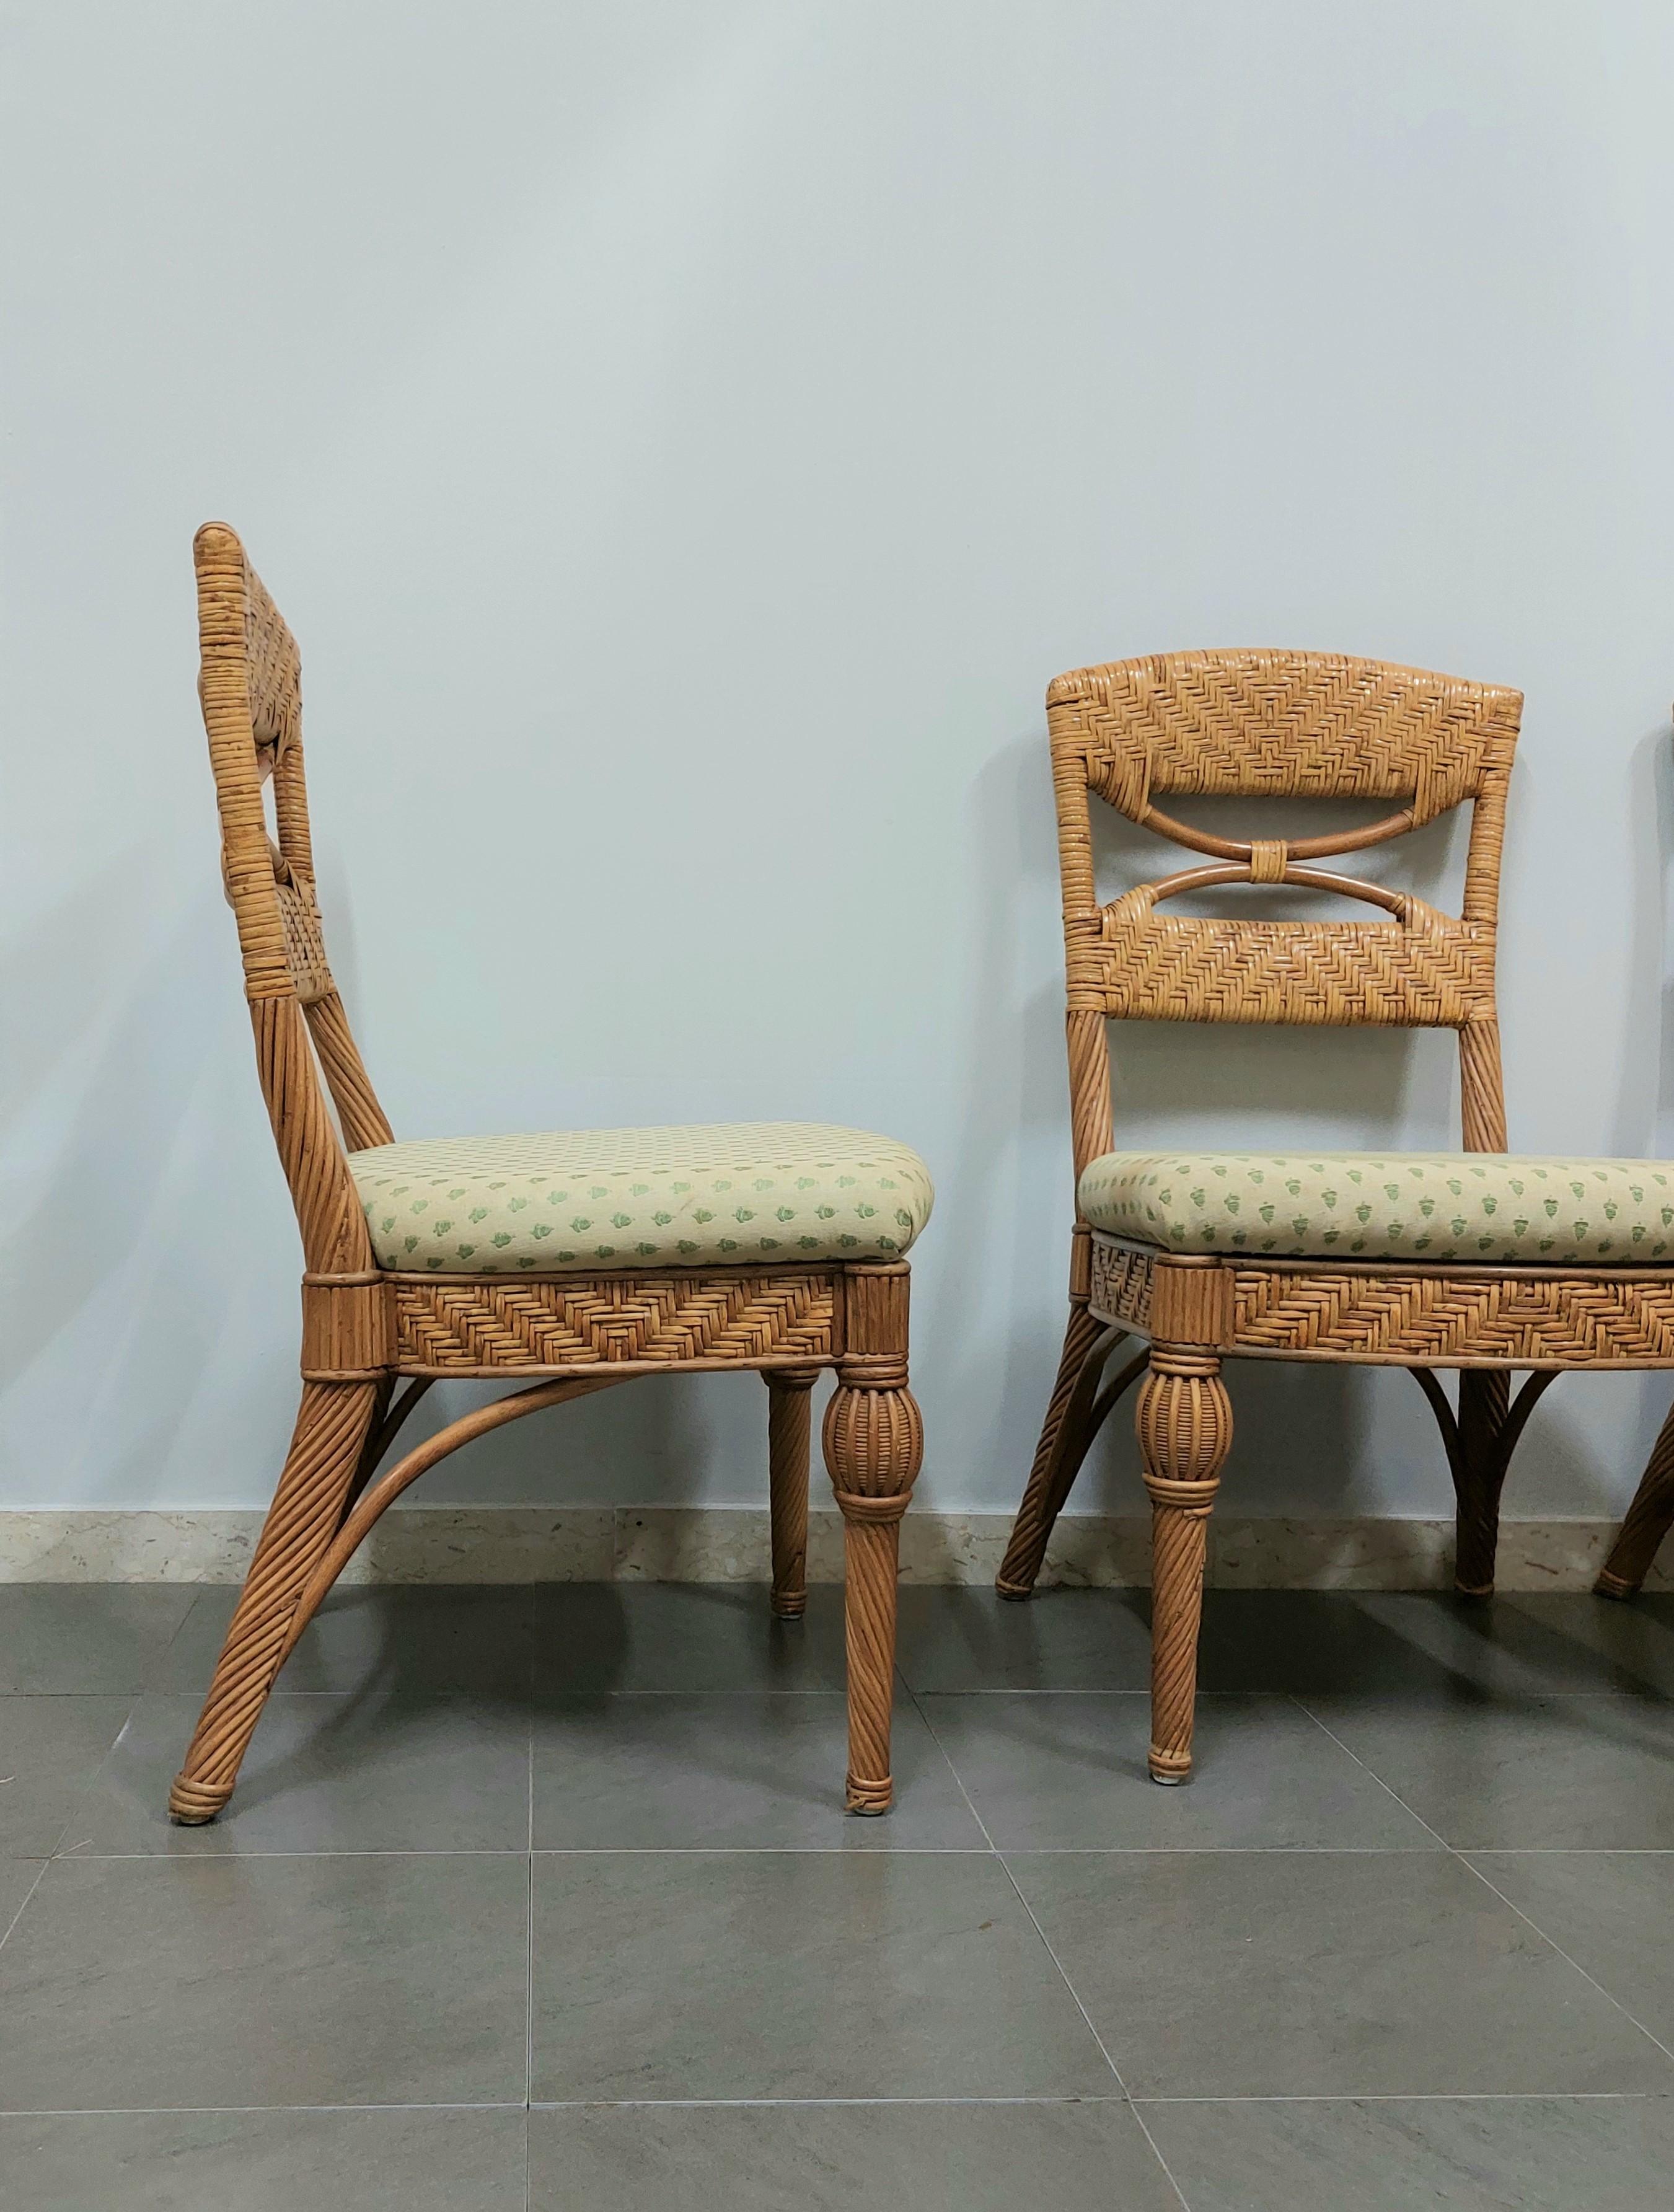 Dining Room Chairs Wicker Fabric Vivai del Sud Midcentury Italy 1980s Set of 4 In Good Condition For Sale In Palermo, IT